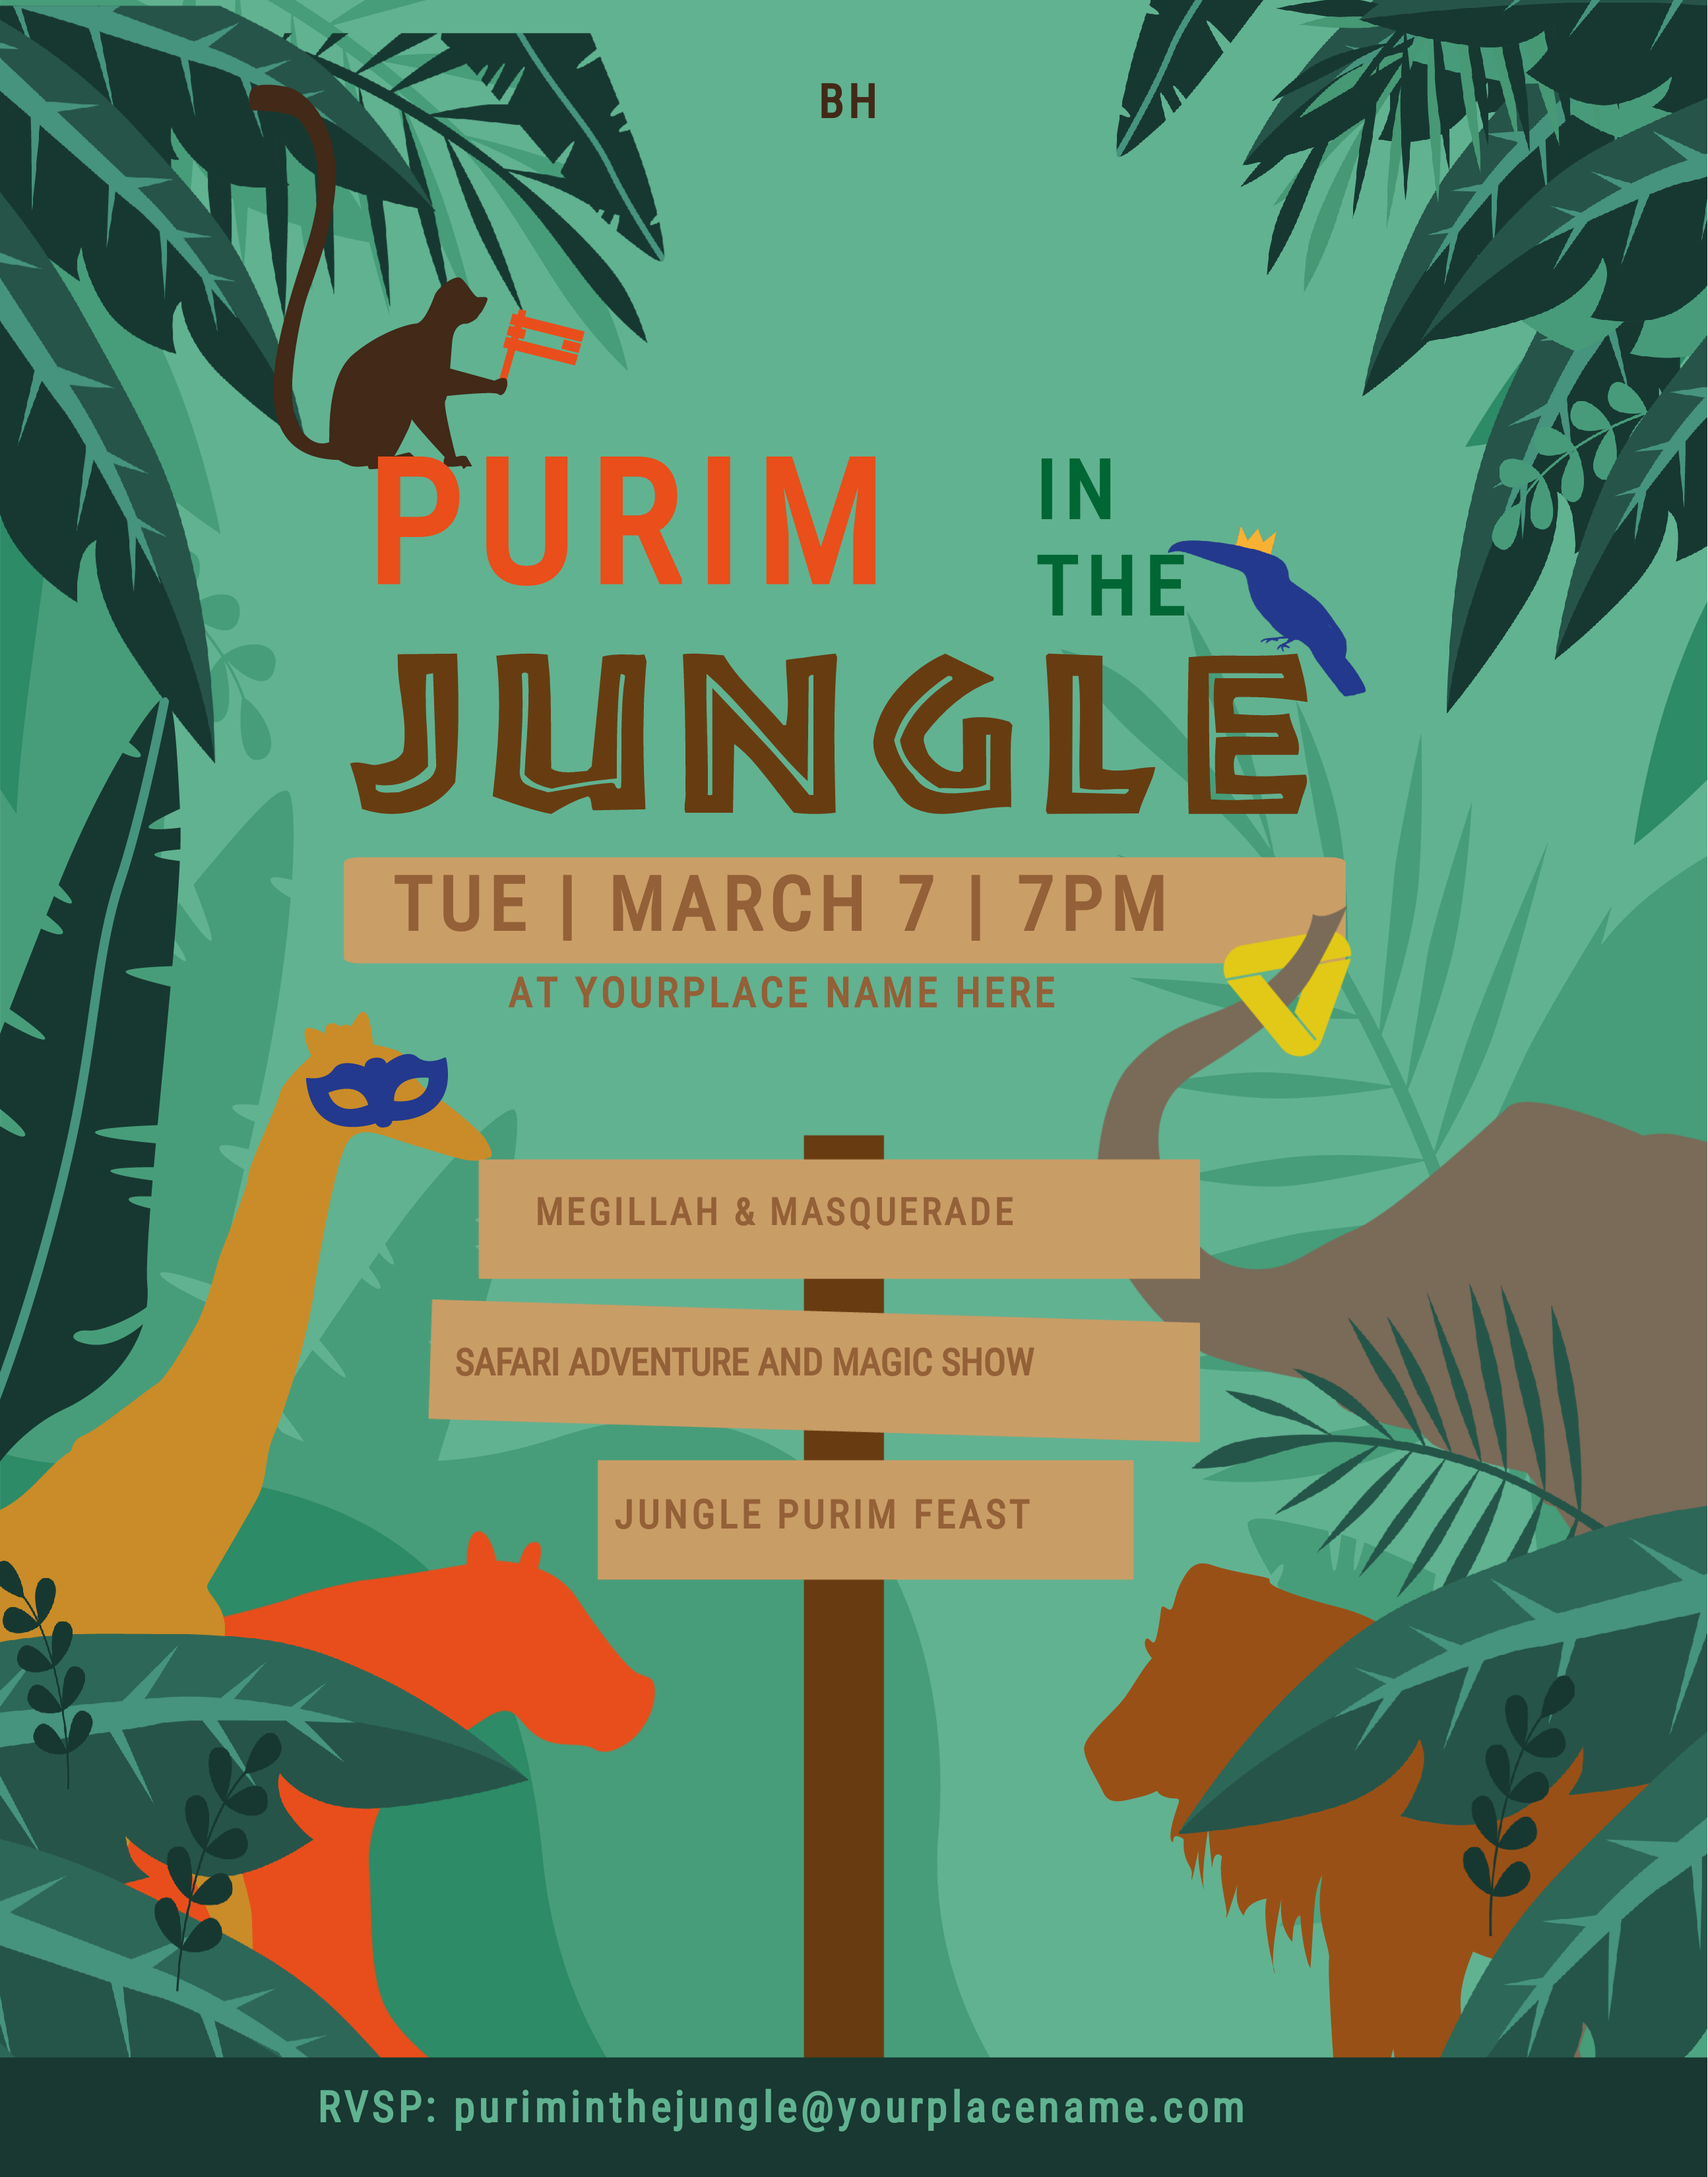 Purim in the jungle flyer